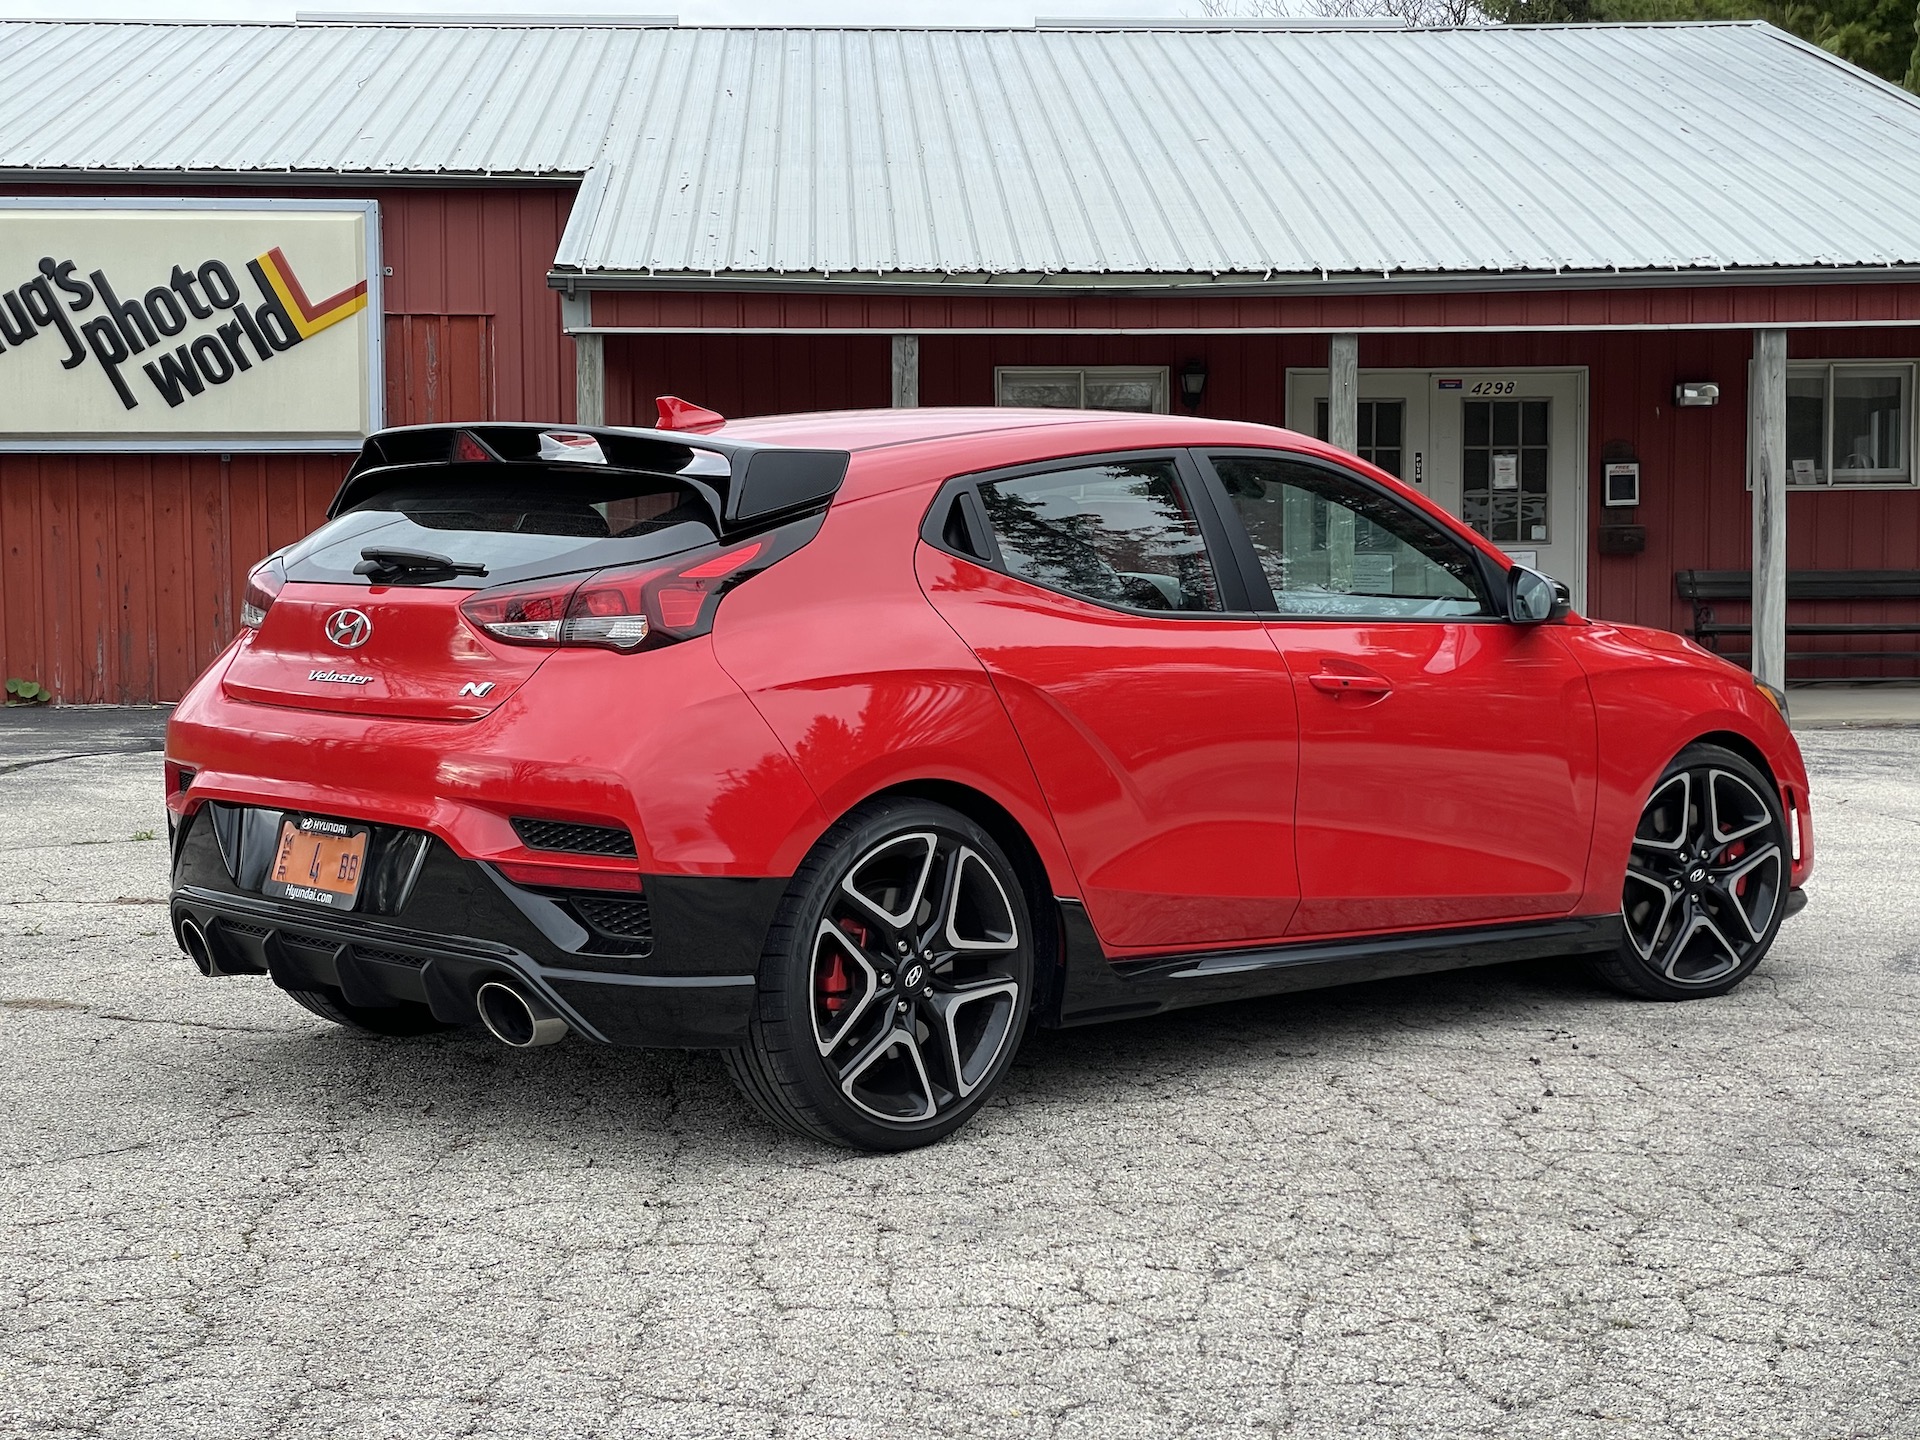 First drive review: 2021 Hyundai Veloster N builds hot hatch